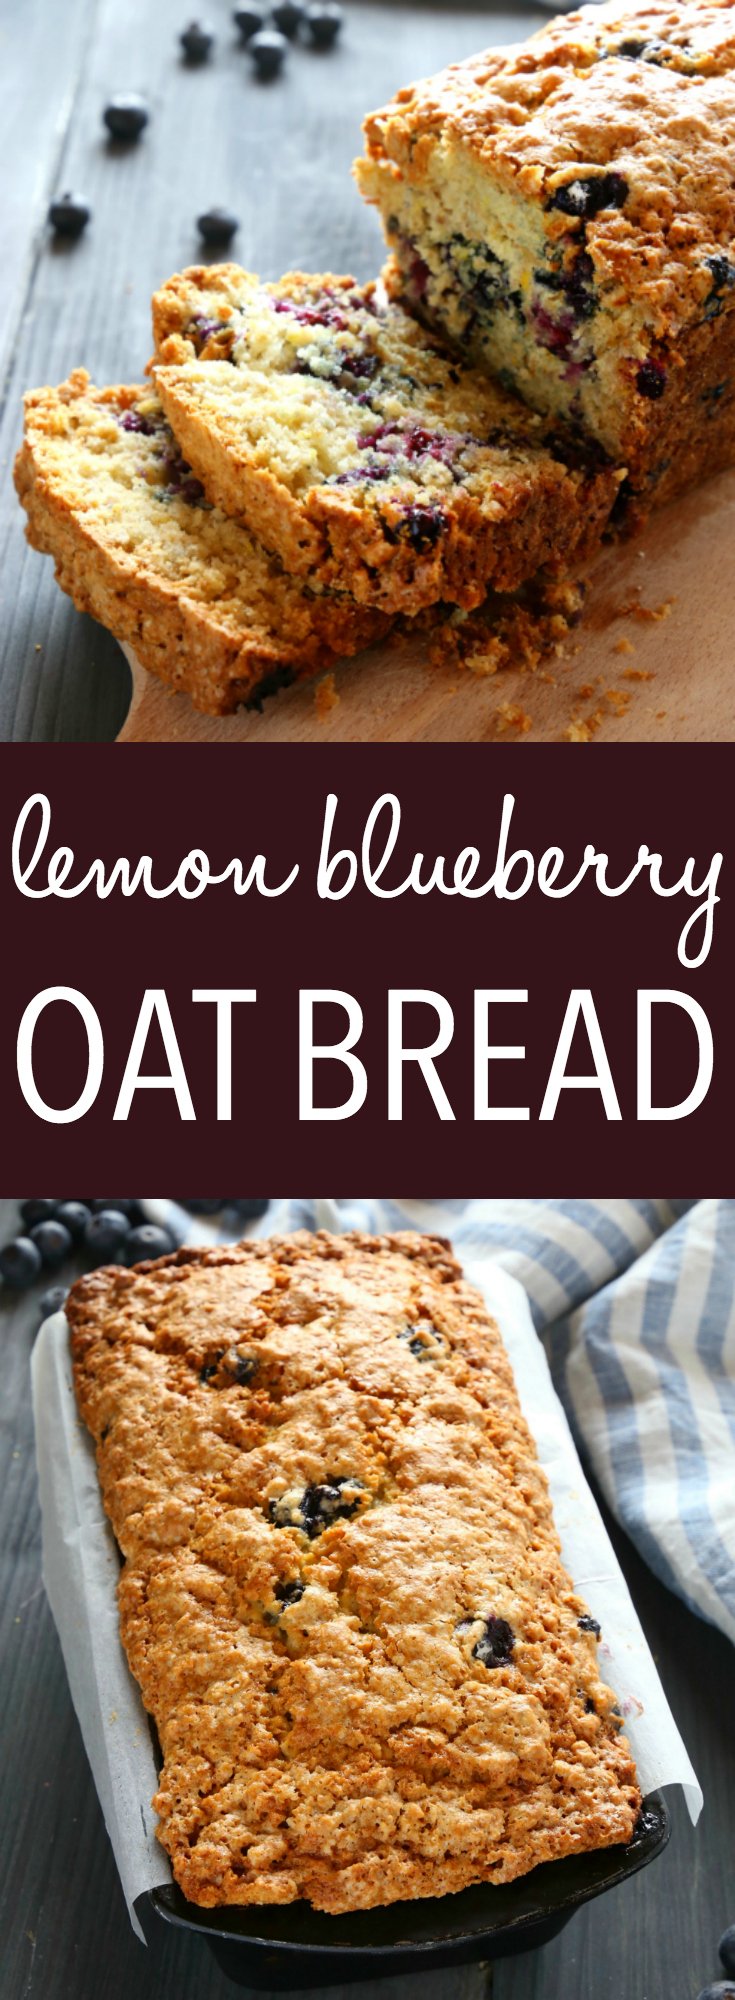 This Lemon Blueberry Oat Bread is the perfect sweet coffee break snack! It's easy to make and packed with whole grains for a healthy twist! Recipe from thebusybaker.ca! #oatbread #lemonblueberrybread #muffinrecipe via @busybakerblog